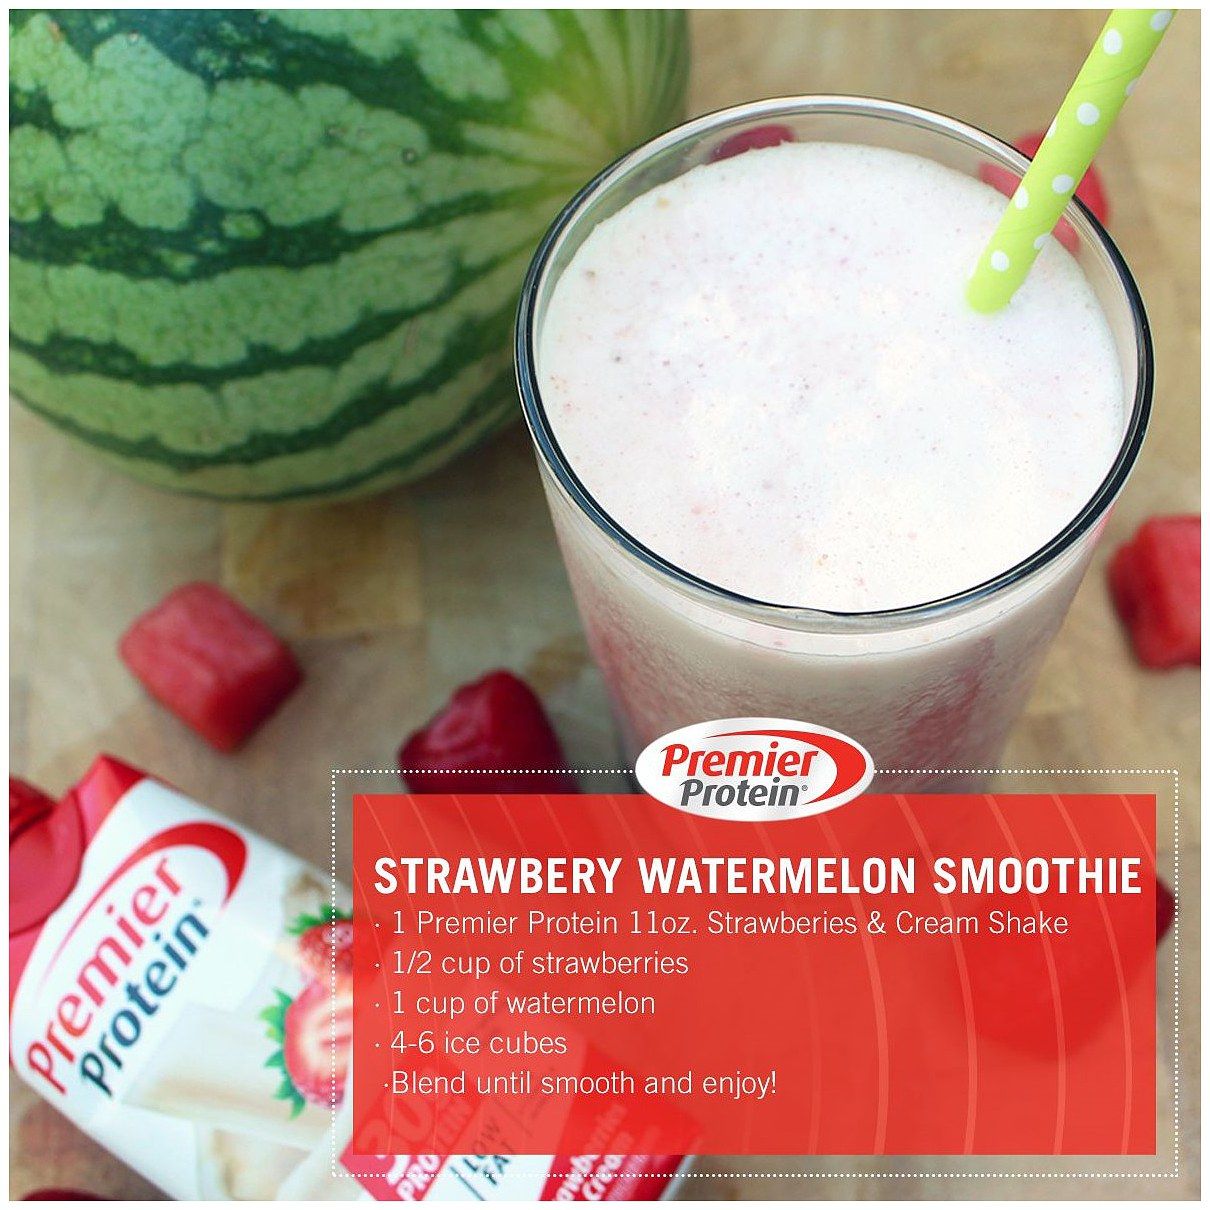 Quench your thirst with our refreshing Strawberry Watermelon smoothie ...